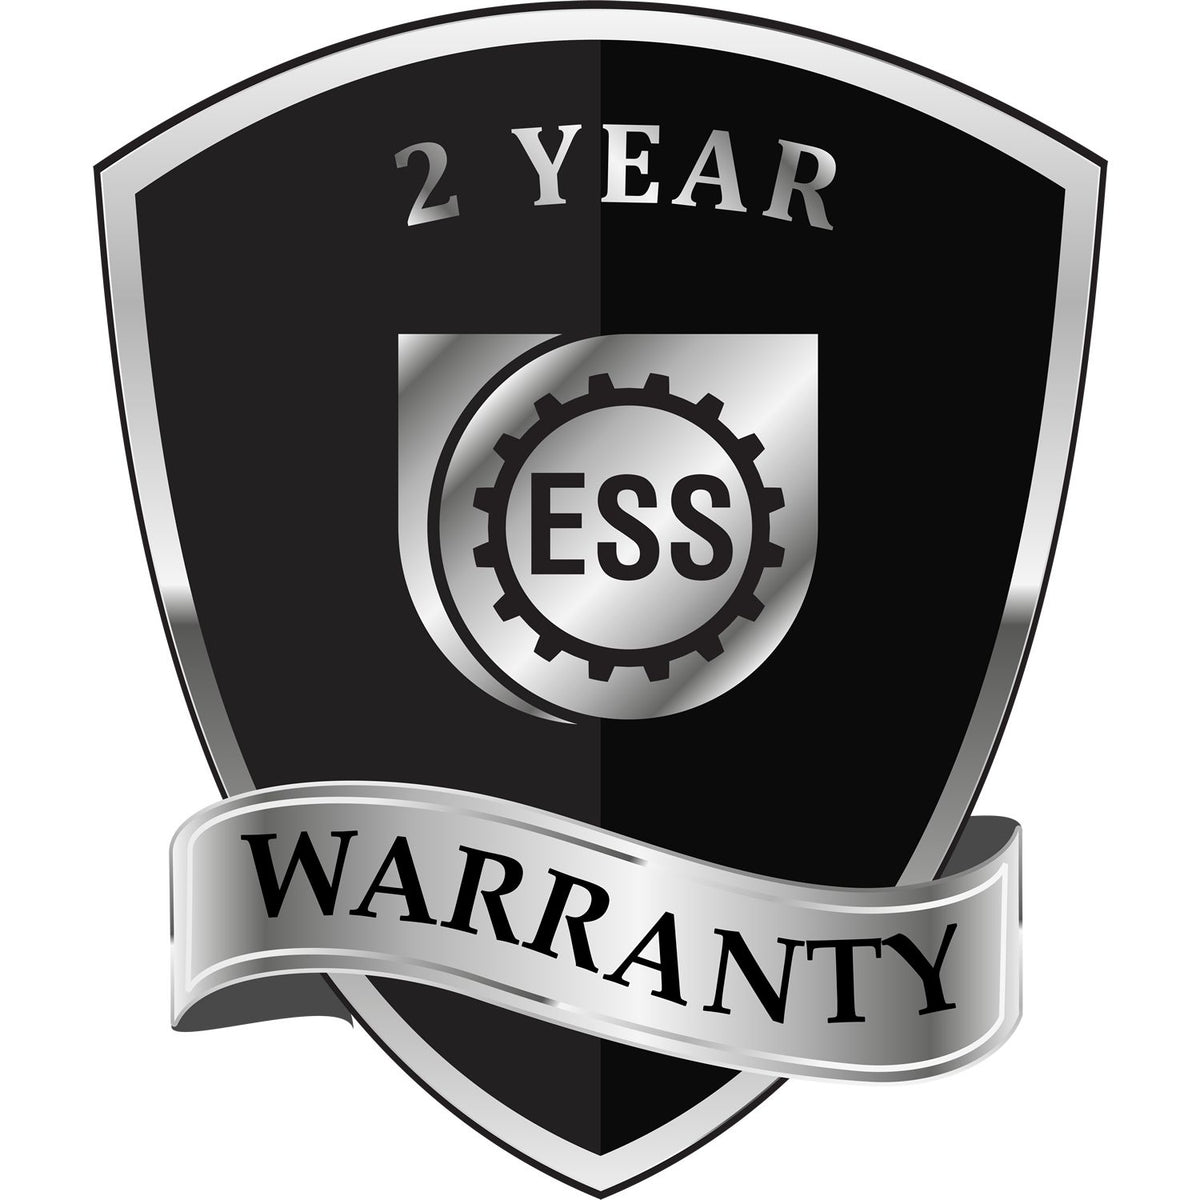 A black and silver badge or emblem showing warranty information for the Hybrid New York Engineer Seal